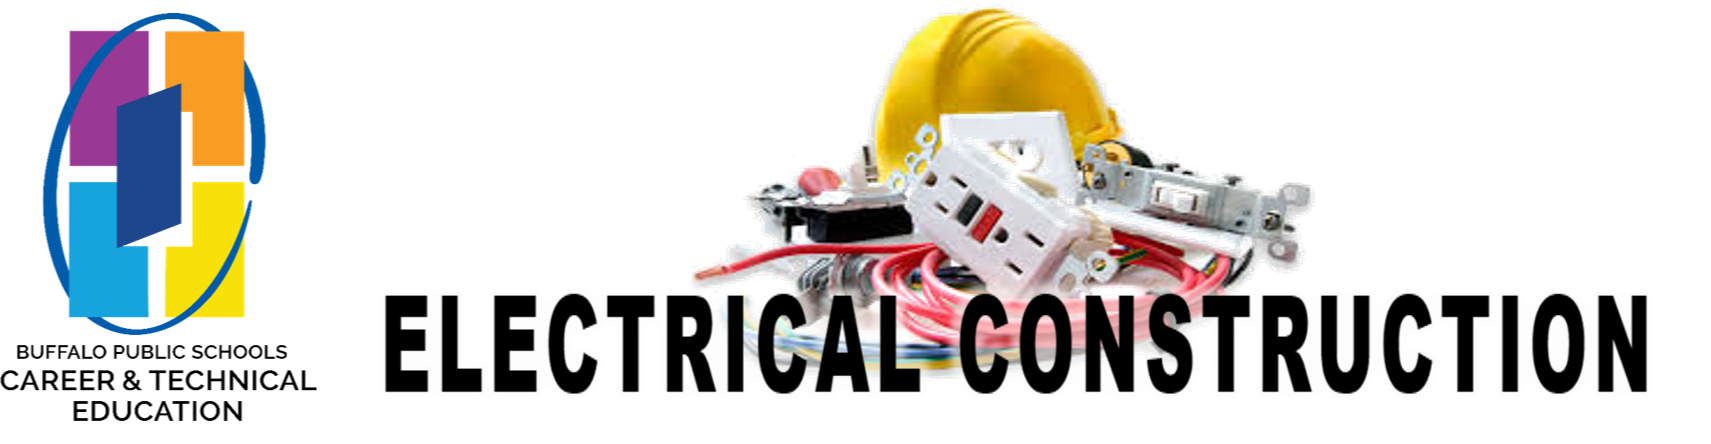 Electrical Construction Banner